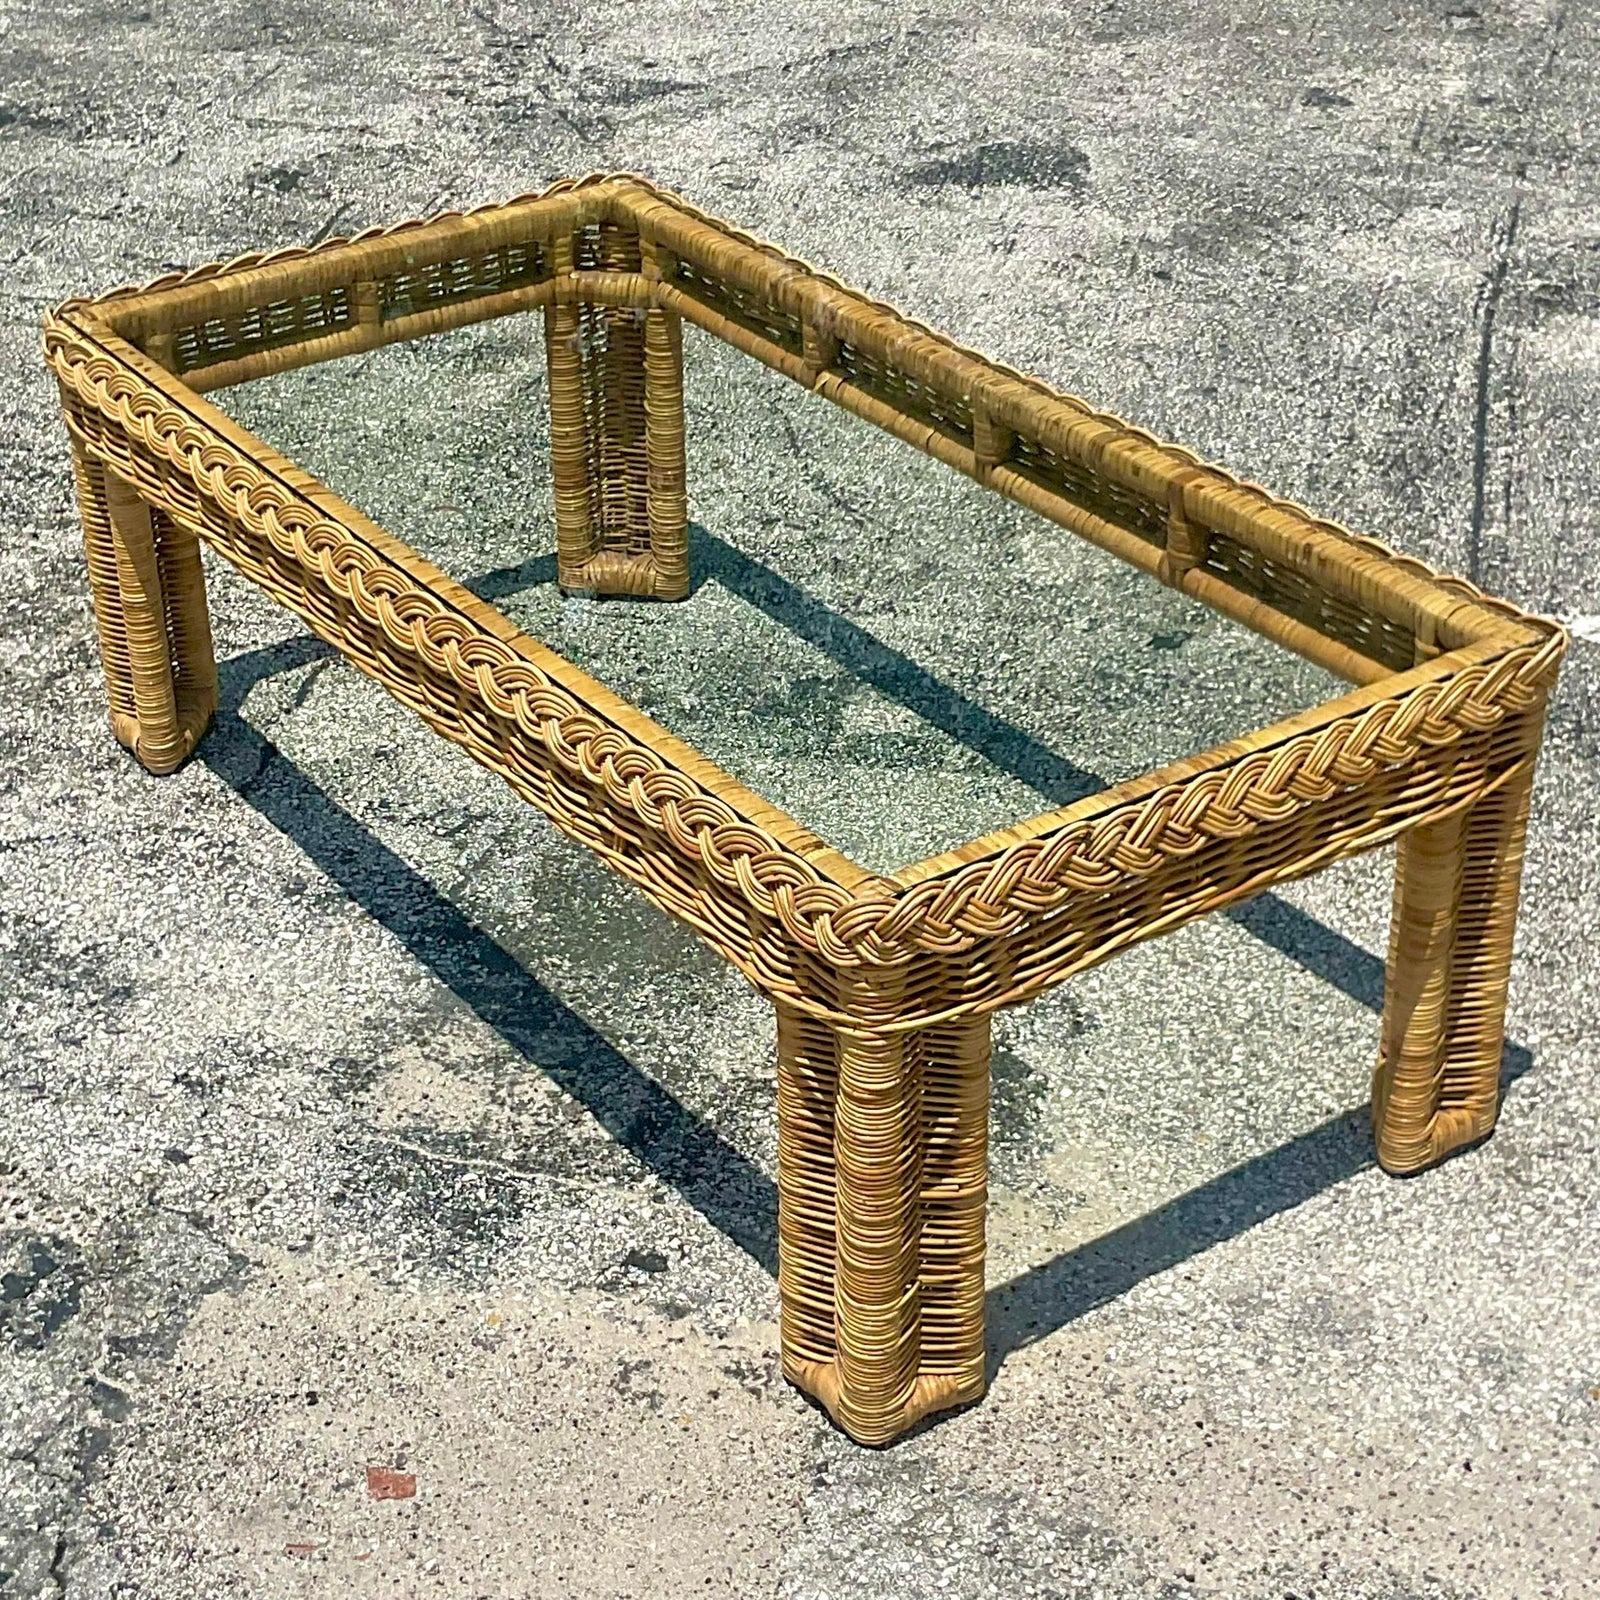 A fabulous vintage Coastal coffee table. A classic rectangle shape with inset glass top. Chic braided rattan trim along the edge. Acquired from a Palm Beach estate.